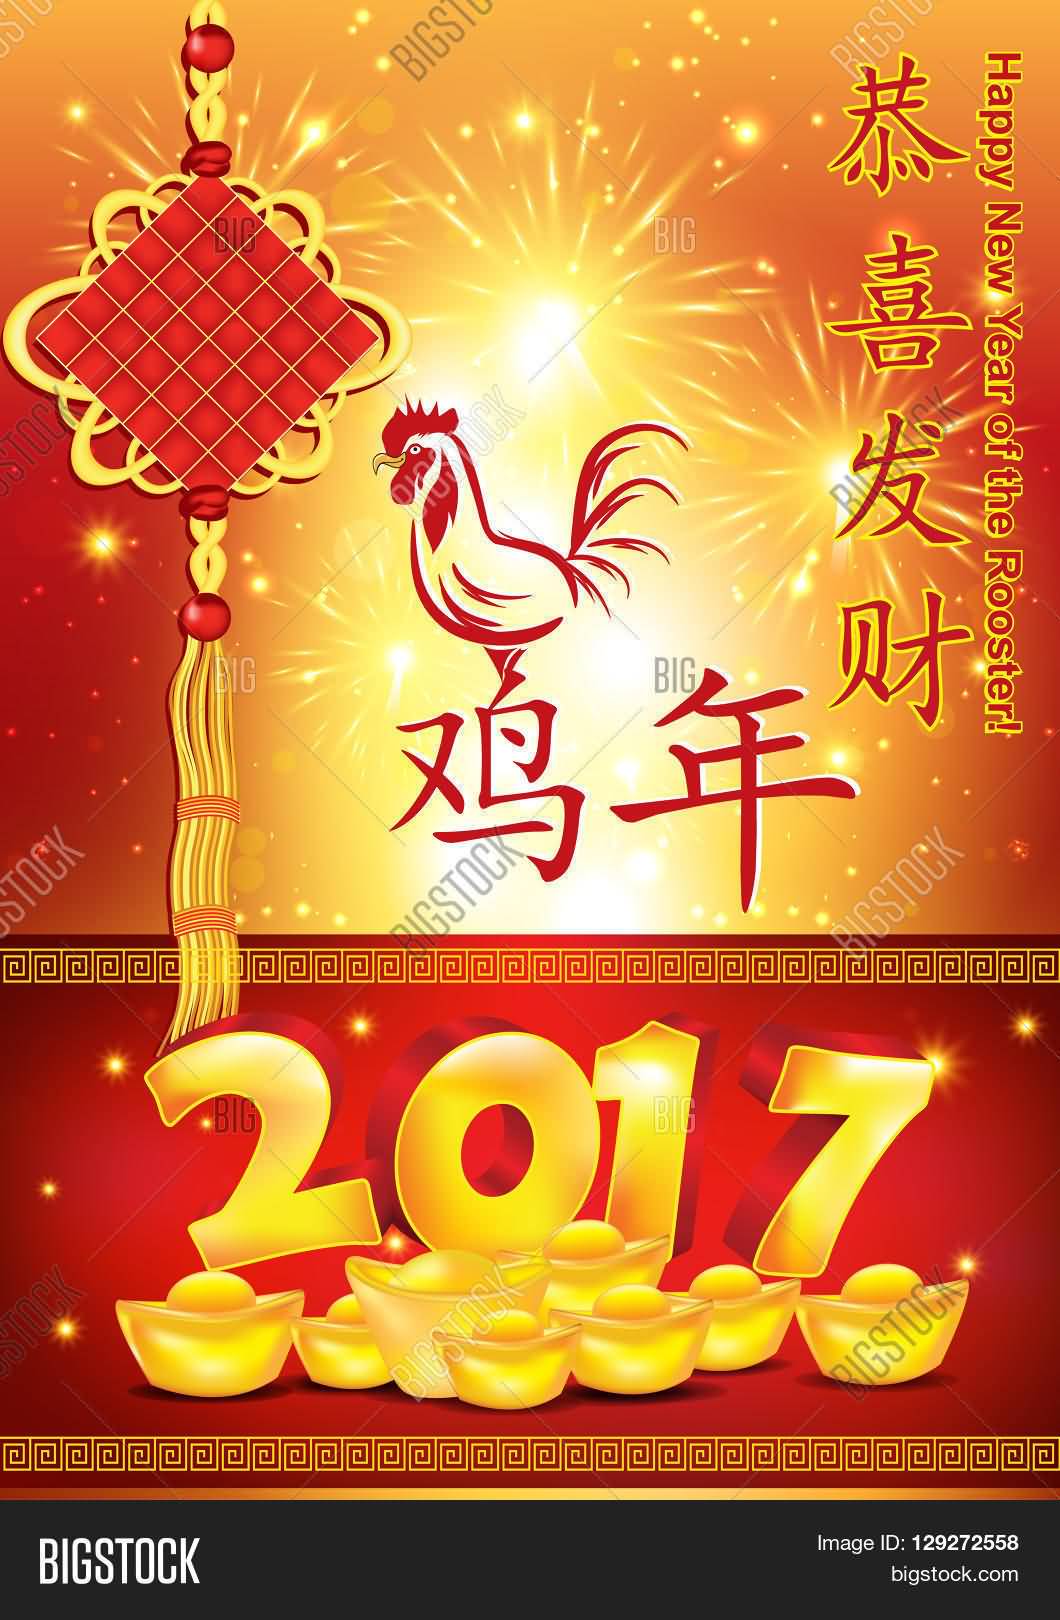 50 Happy Chinese New Year 2017 Wish Pictures And Photos1060 x 1620